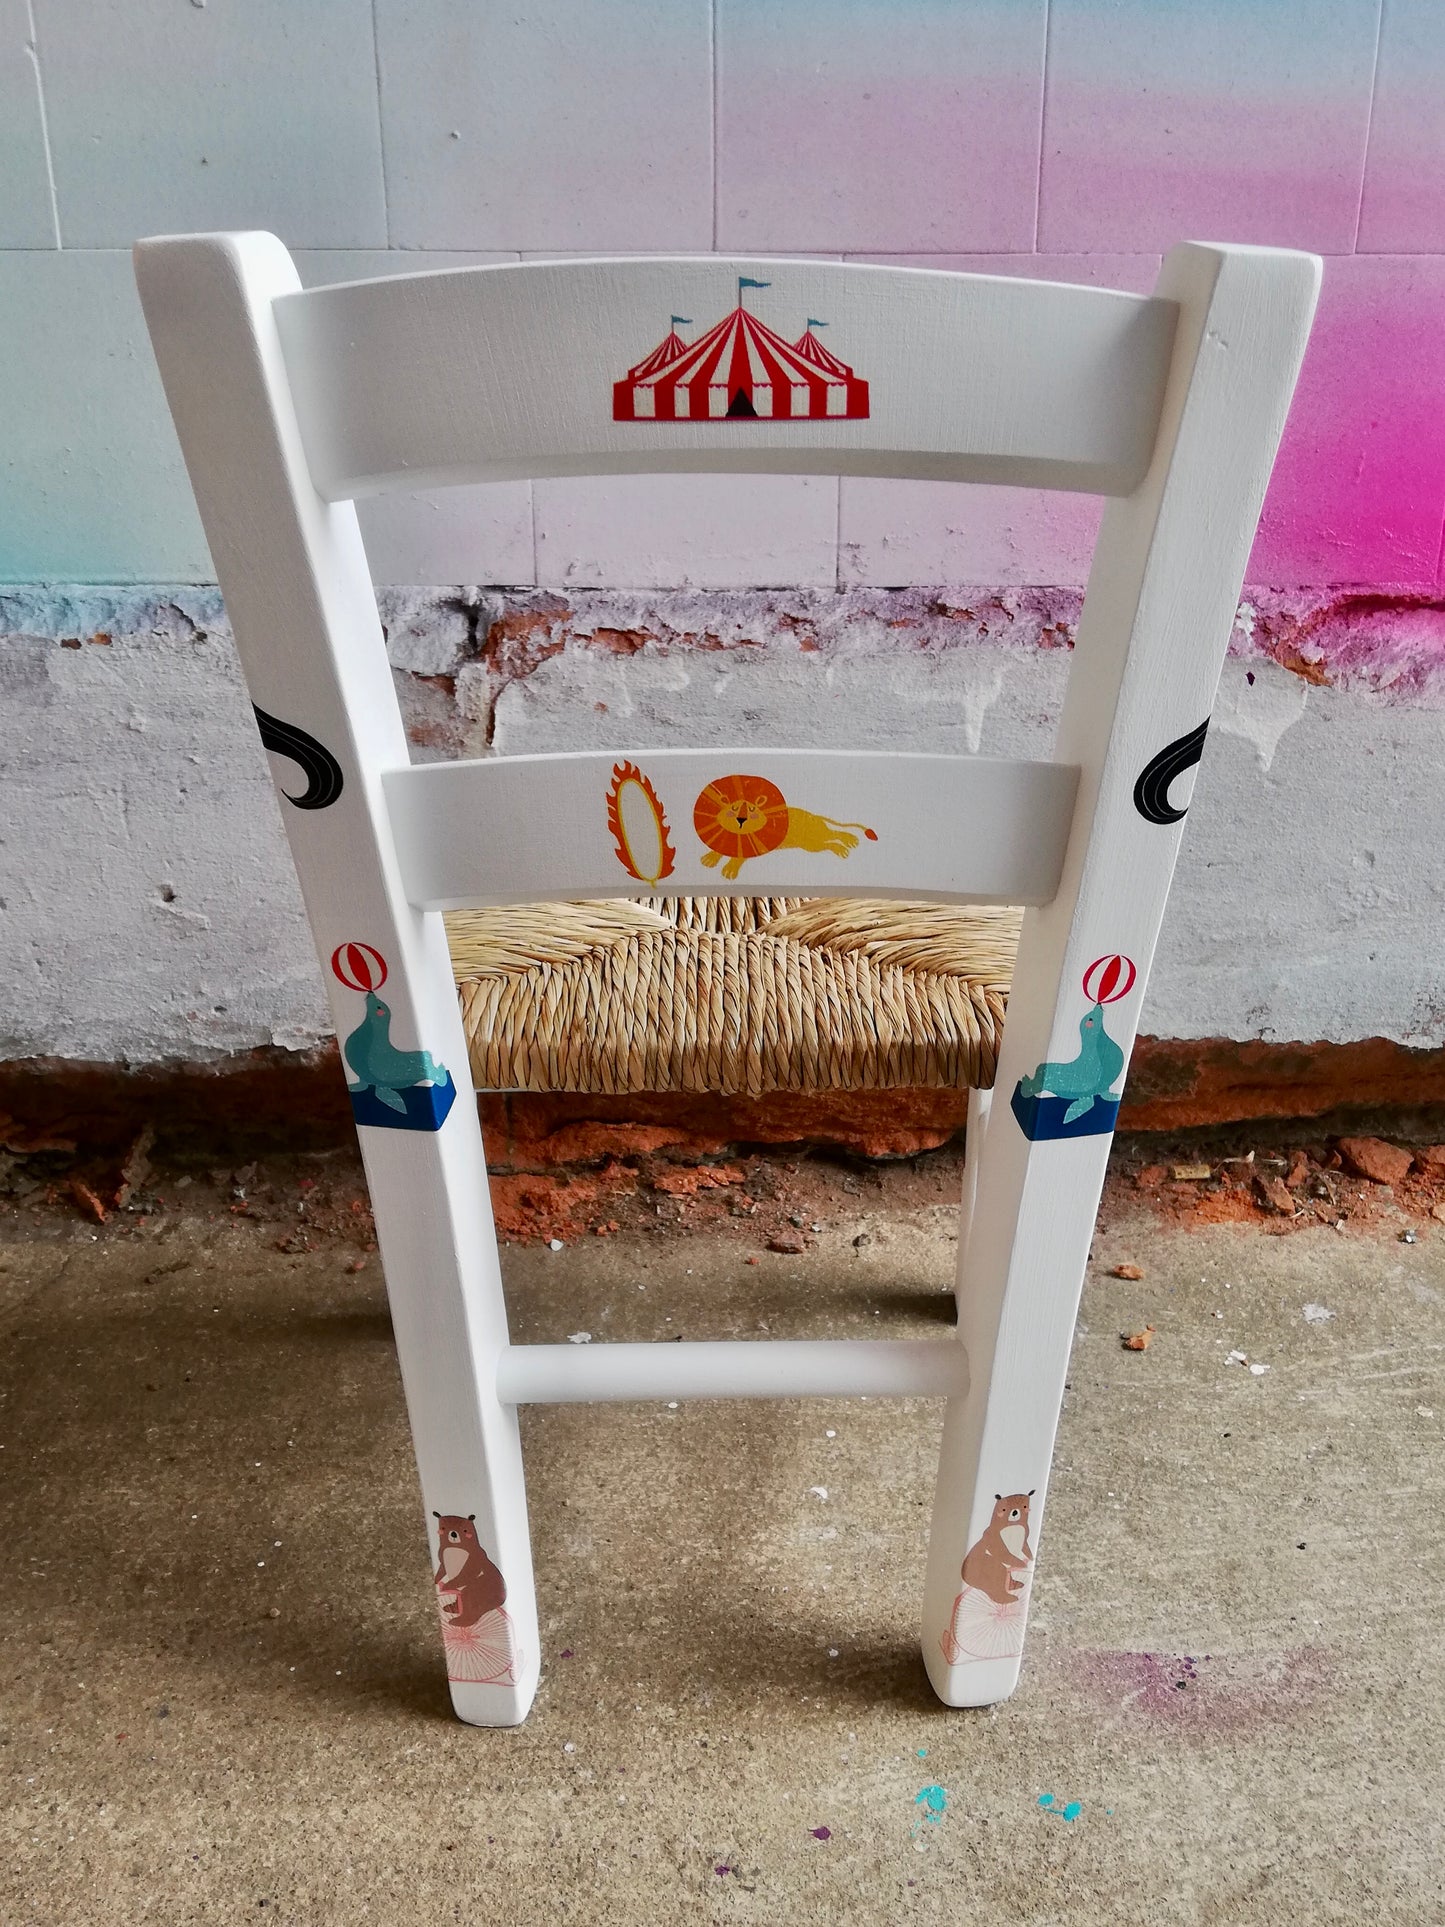 Rush seat personalised children's chair - French Circus theme - made to order